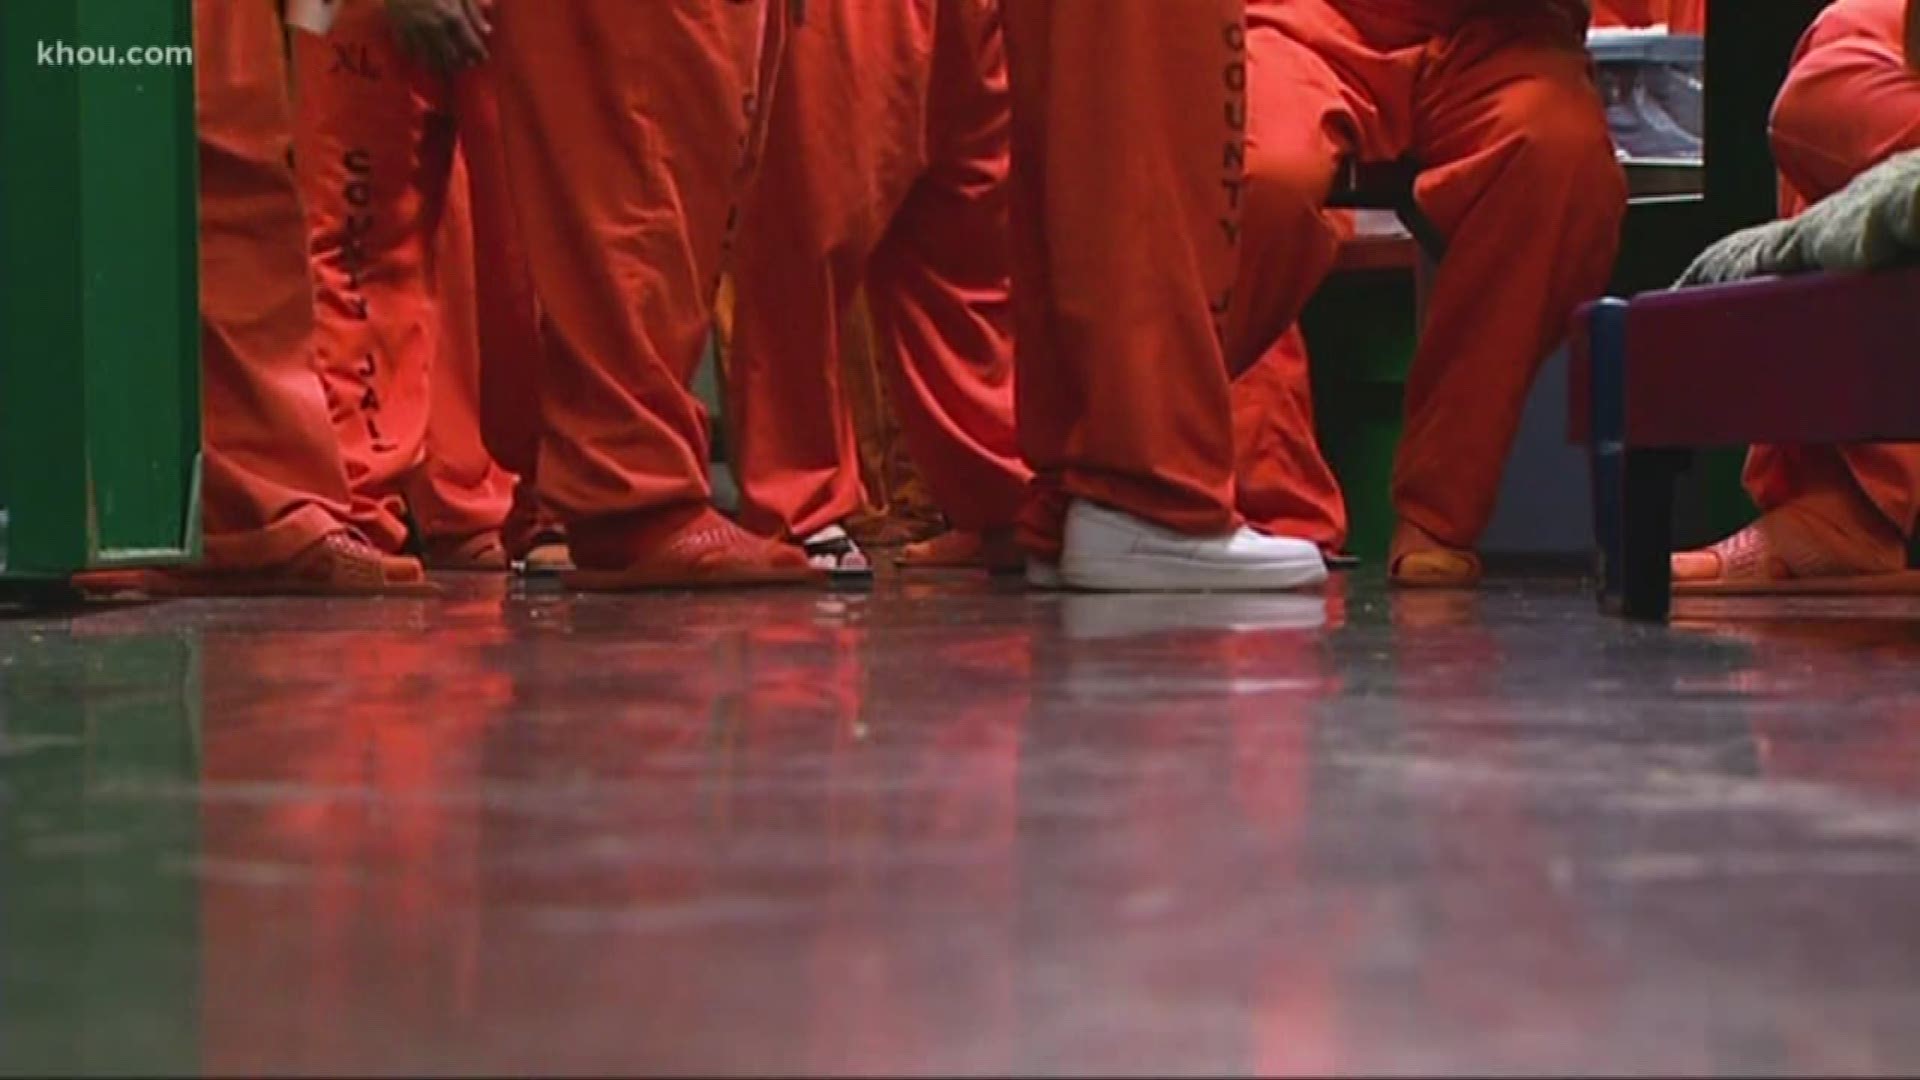 Harris County officials announced Wednesday more offenders with mental health illnesses will be placed into a mental health facility instead of jail.